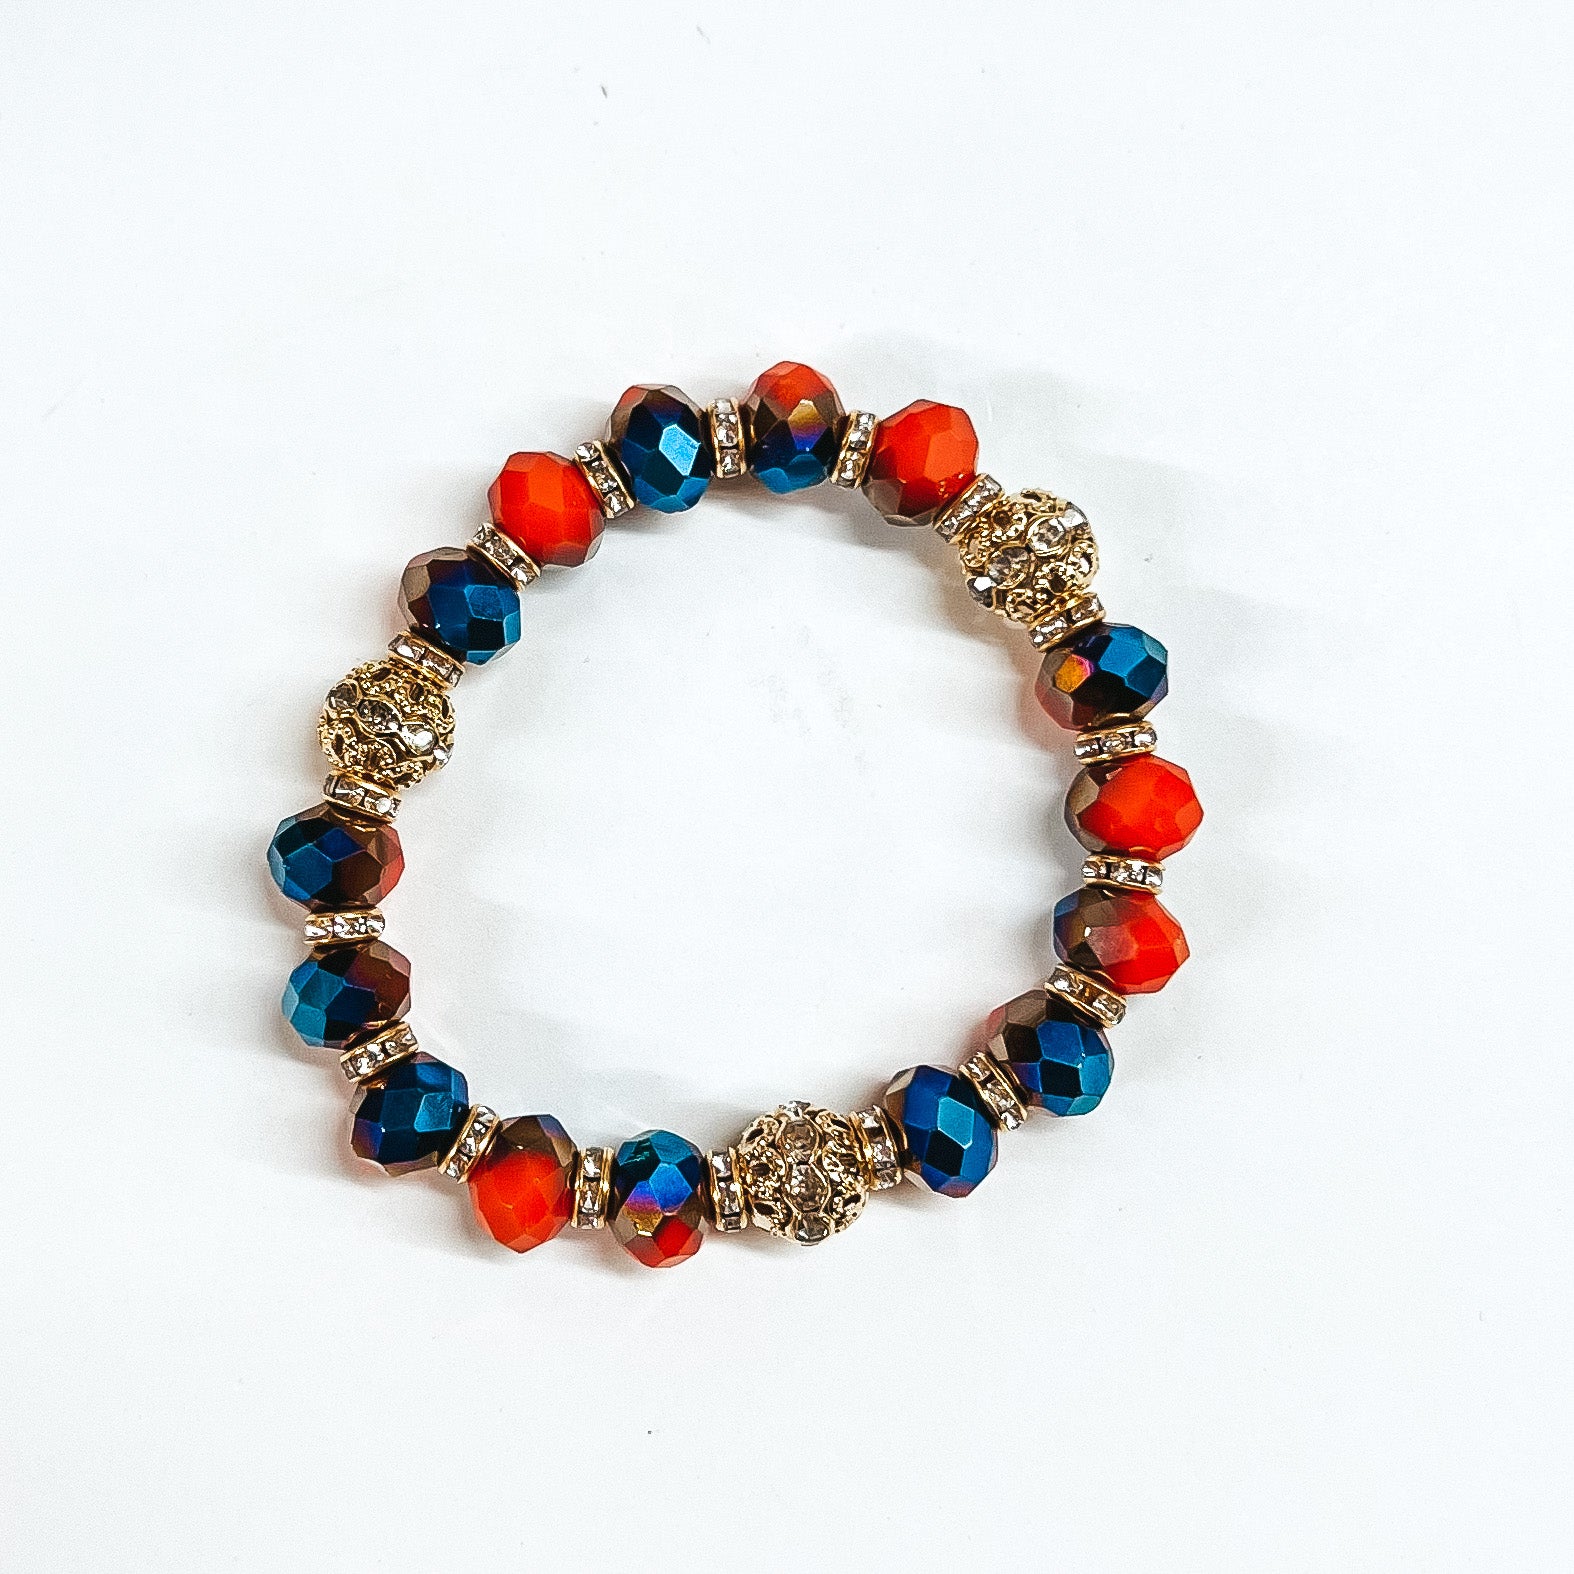 This is blue/orange mix crystal beaded bracelets with gold spacers.  The gold spacers have clear crystals in them and there are three gold and  crystals beads.This bracelet is taken on white background.